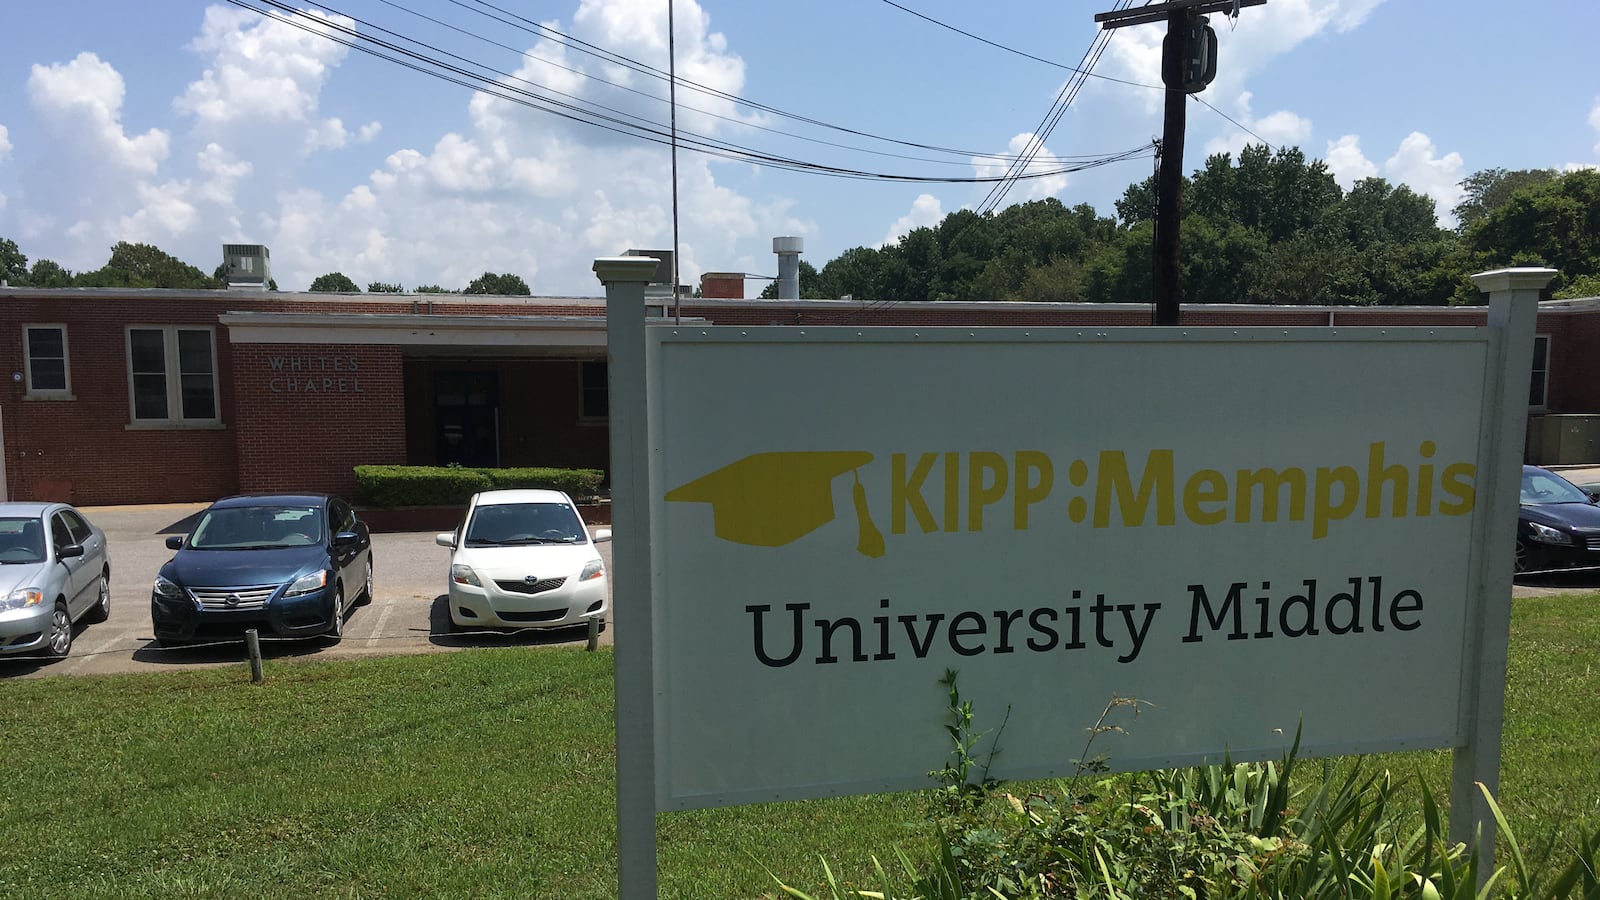 KIPP Memphis University Middle is closing after three years of operation under the state-run Achievement School District. The school operates in a former school building operated by Shelby County Schools.